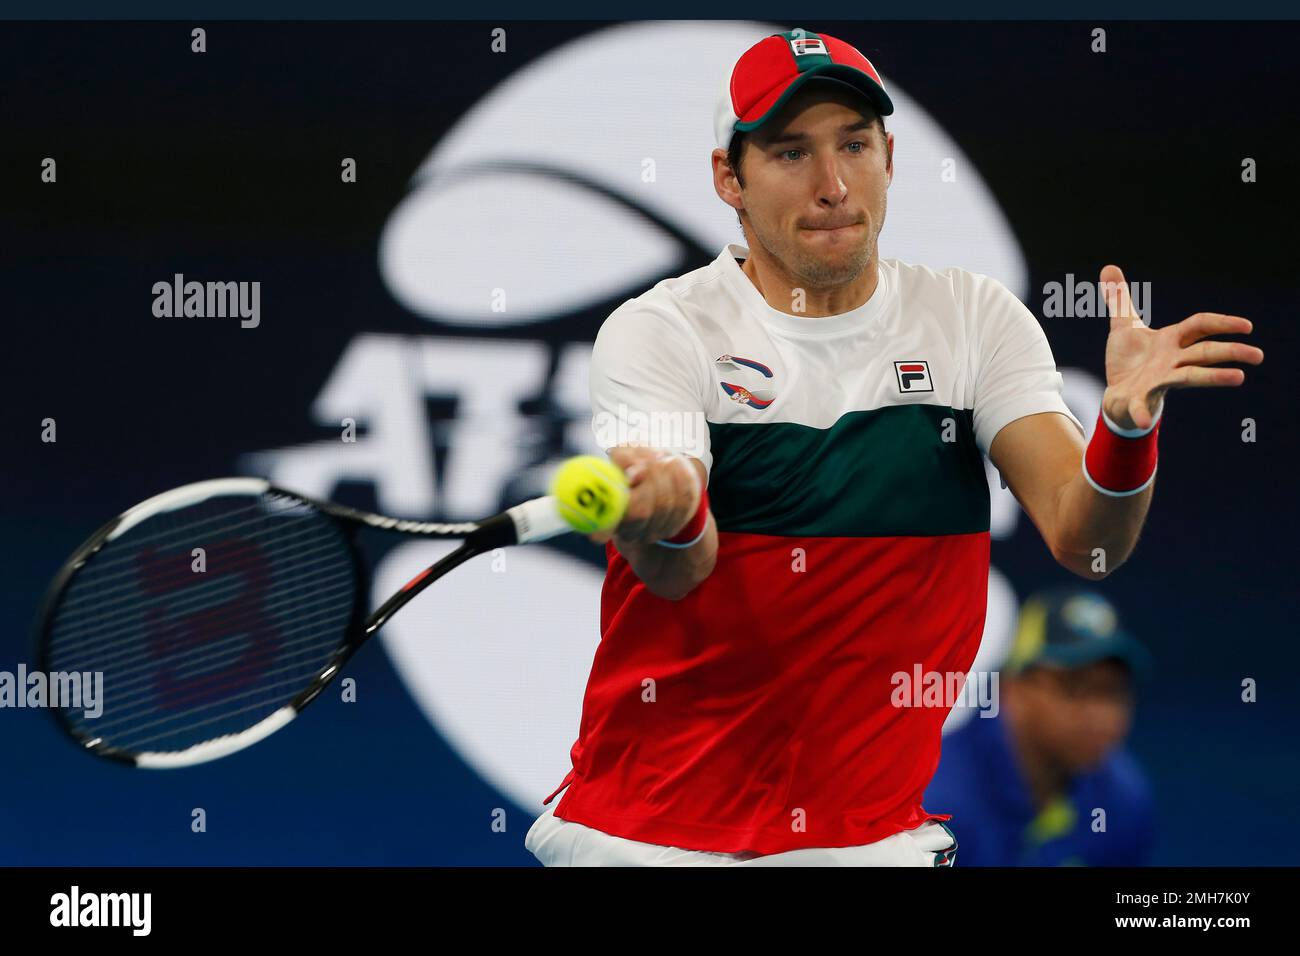 Dusan Lajovic of Serbia makes a forehand return to Karen Khachanov of  Russia during their ATP Cup semifinal tennis match in Sydney, Saturday,  Jan. 11, 2020. (AP Photo/Steve Christo Stock Photo - Alamy